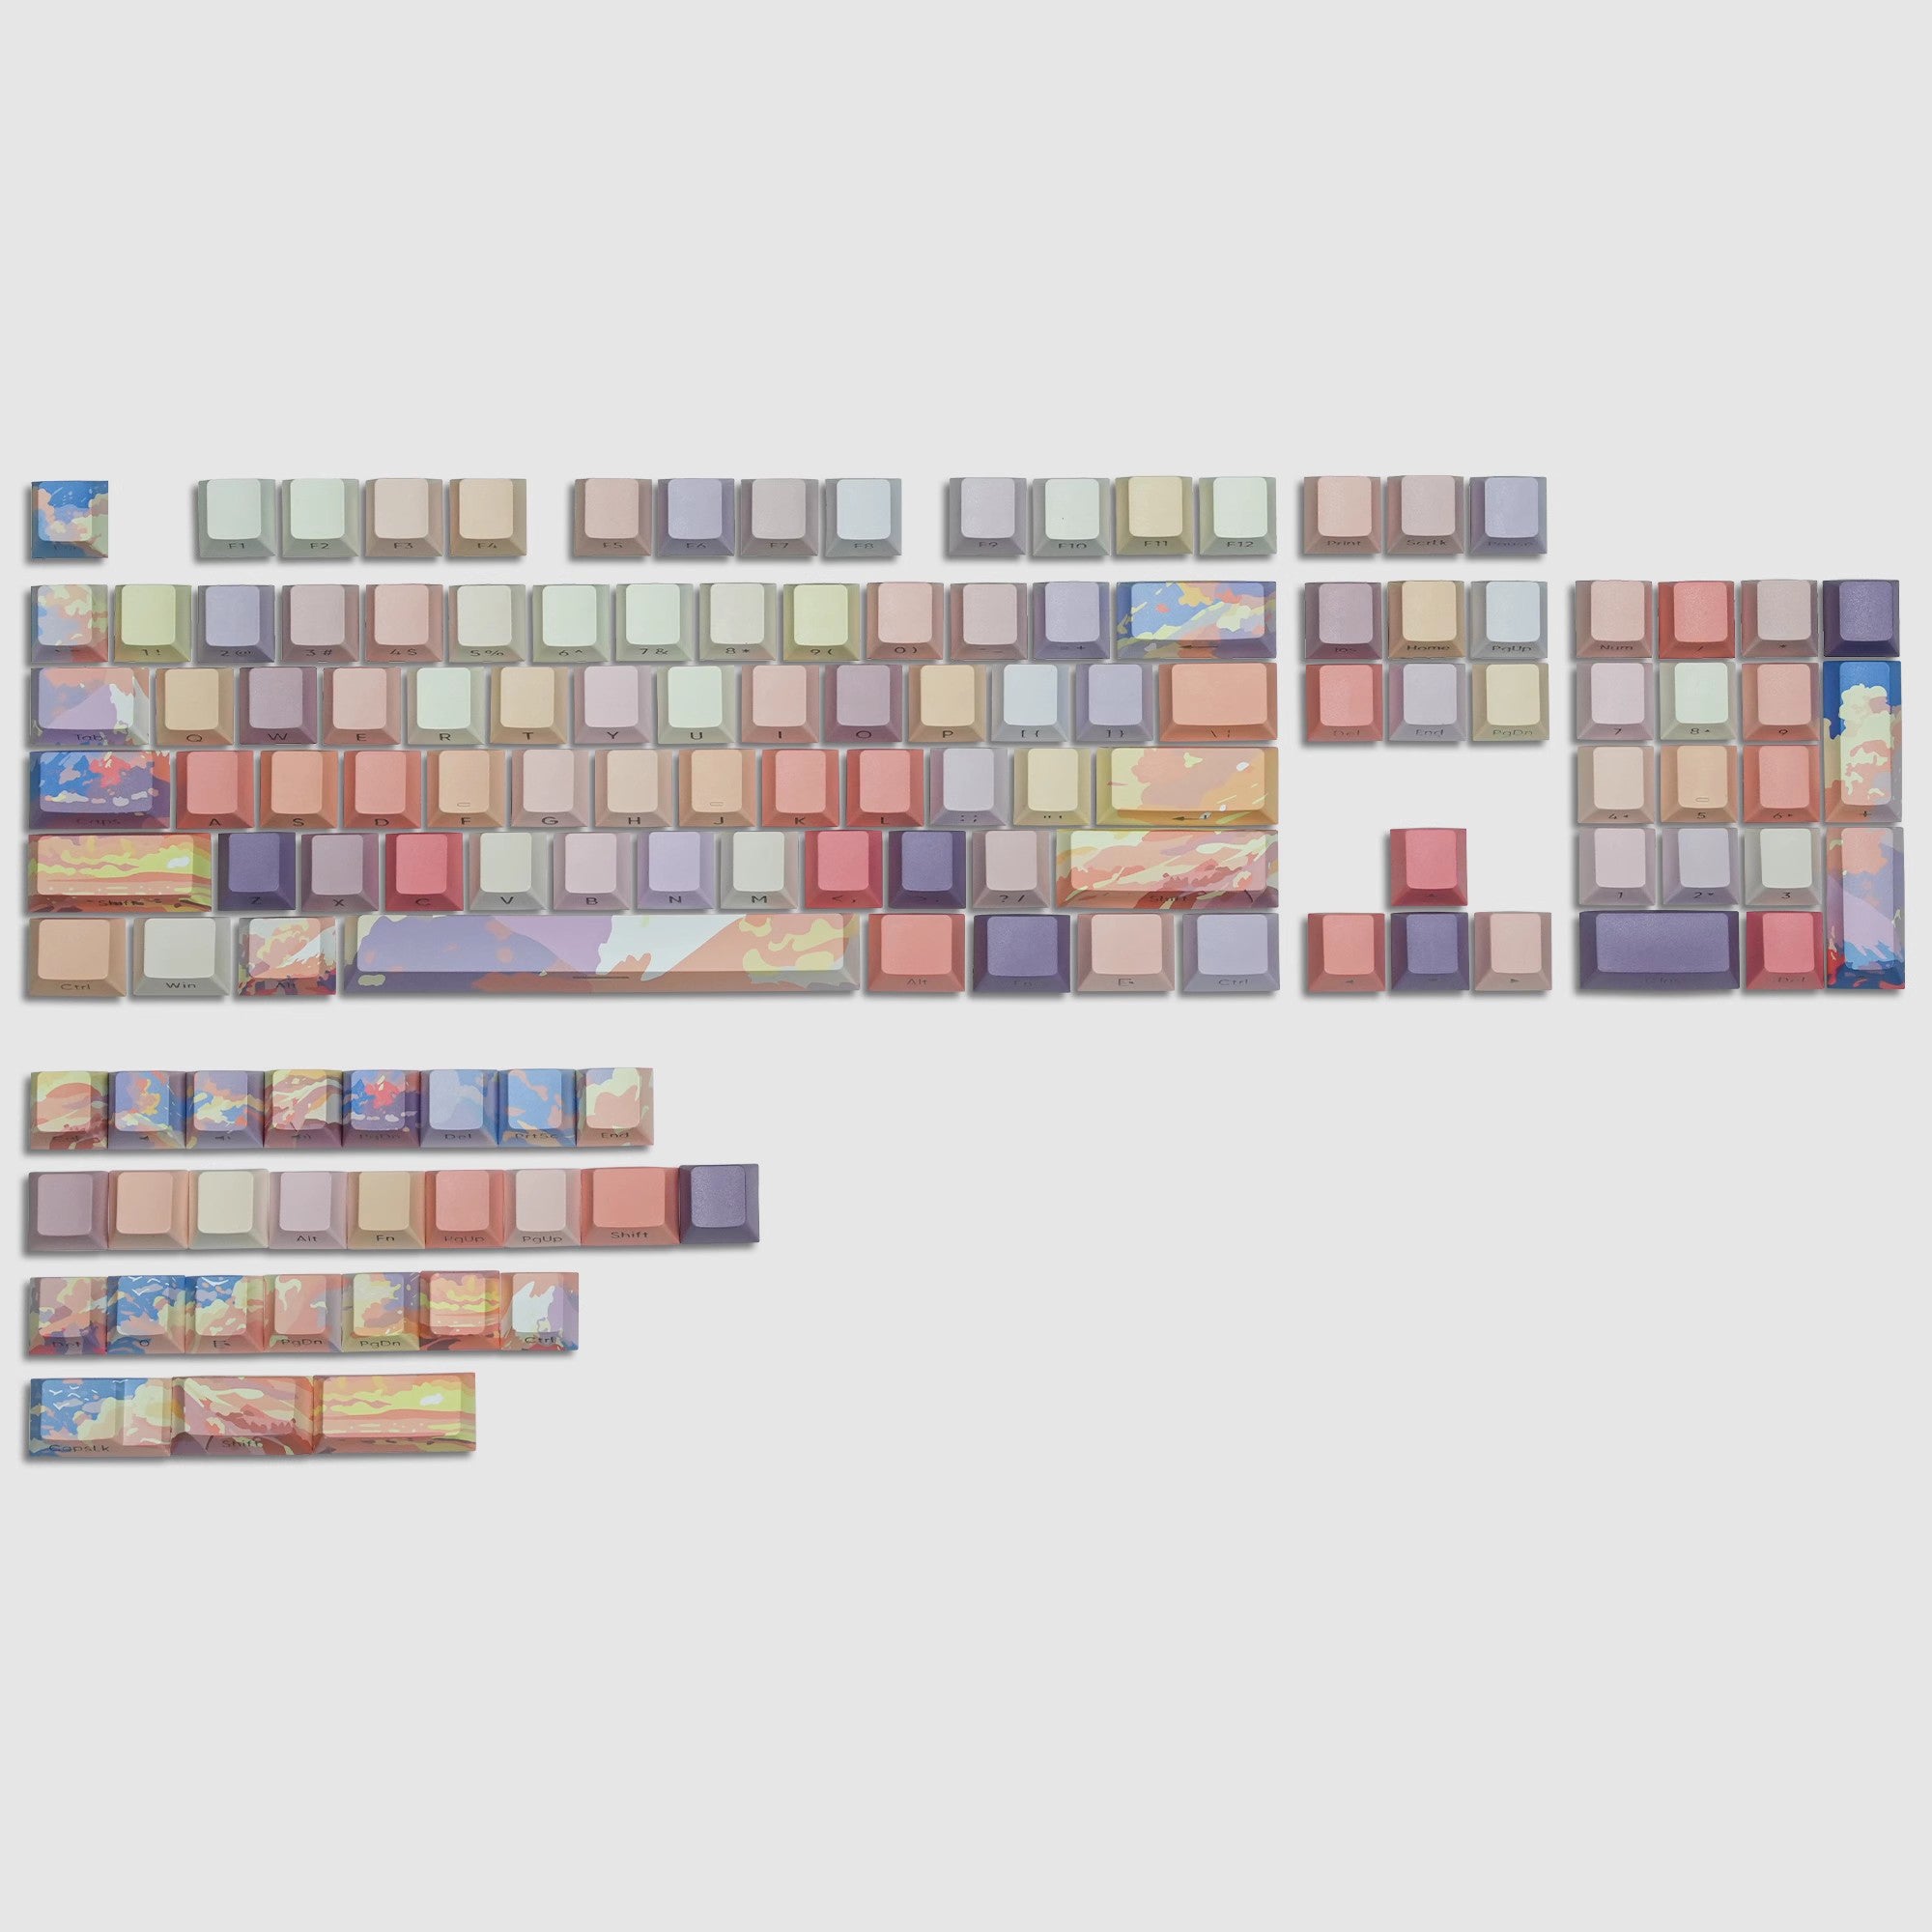 Under-The-Mount-Fuji-Keycaps-Set-PBT-Side-Printed-Cherry-Profile